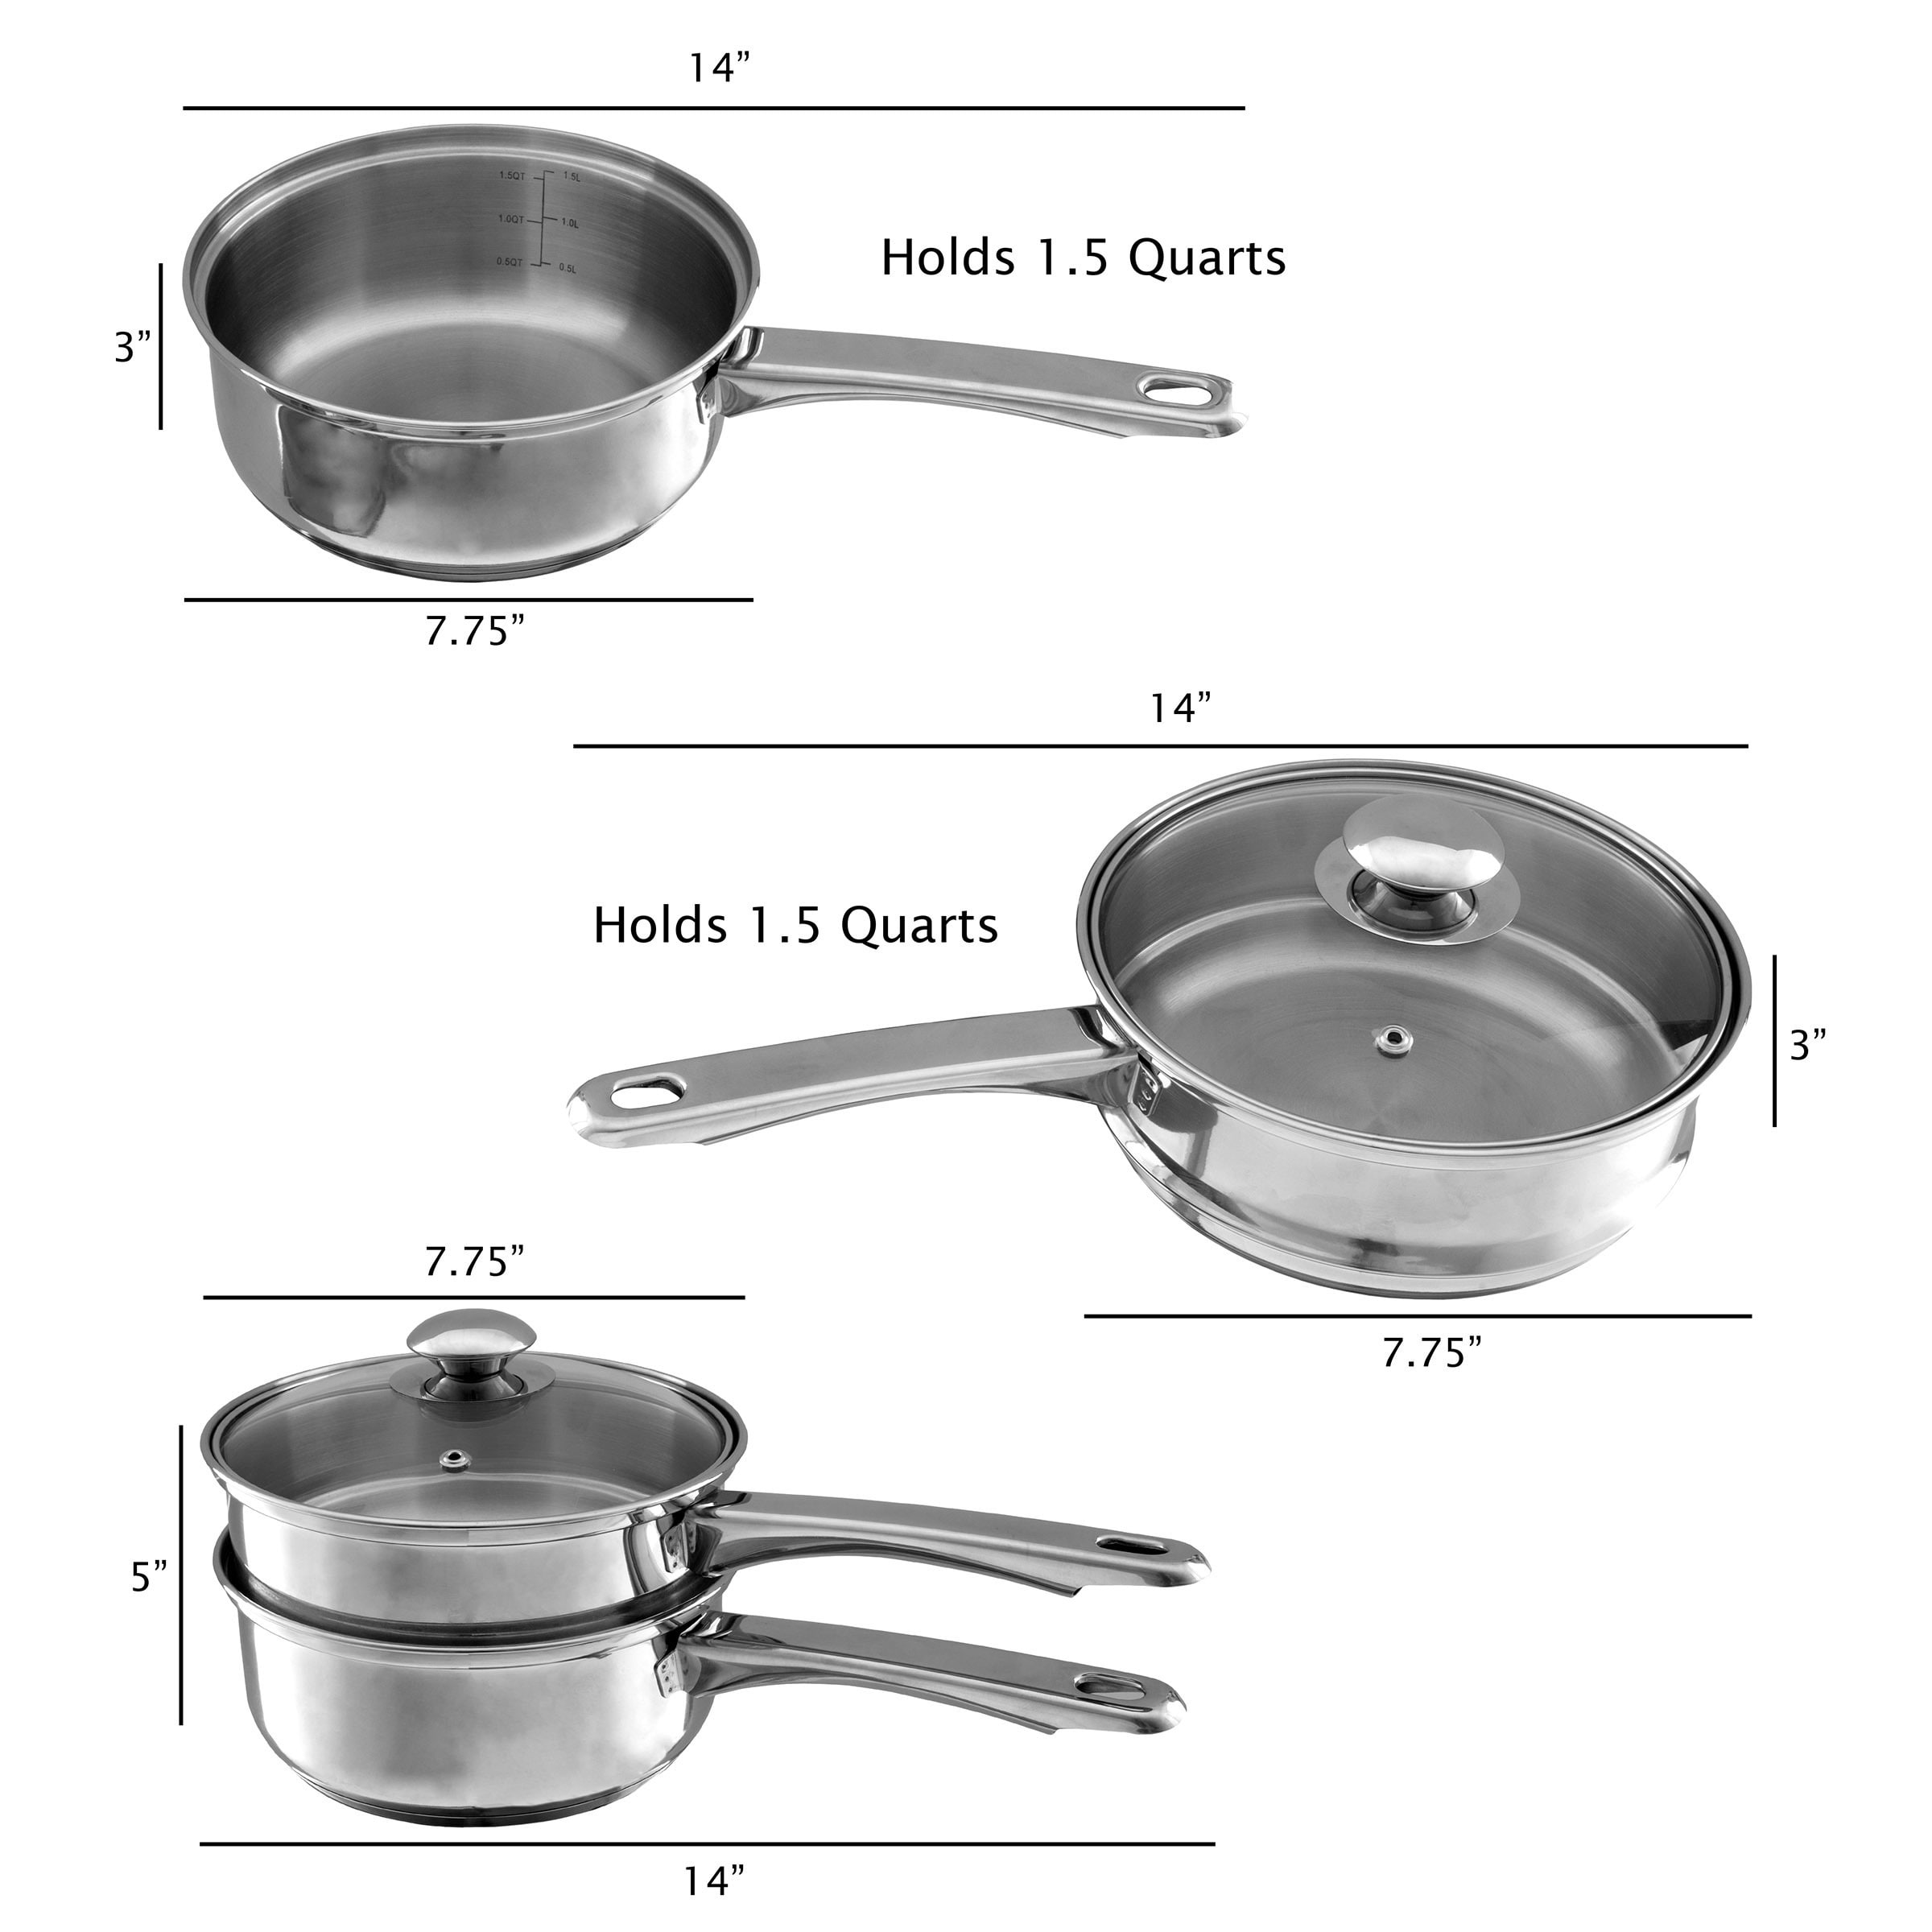 Classic Cuisine Stainless Steel 6 Cup Double Boiler and 1.5 Quart